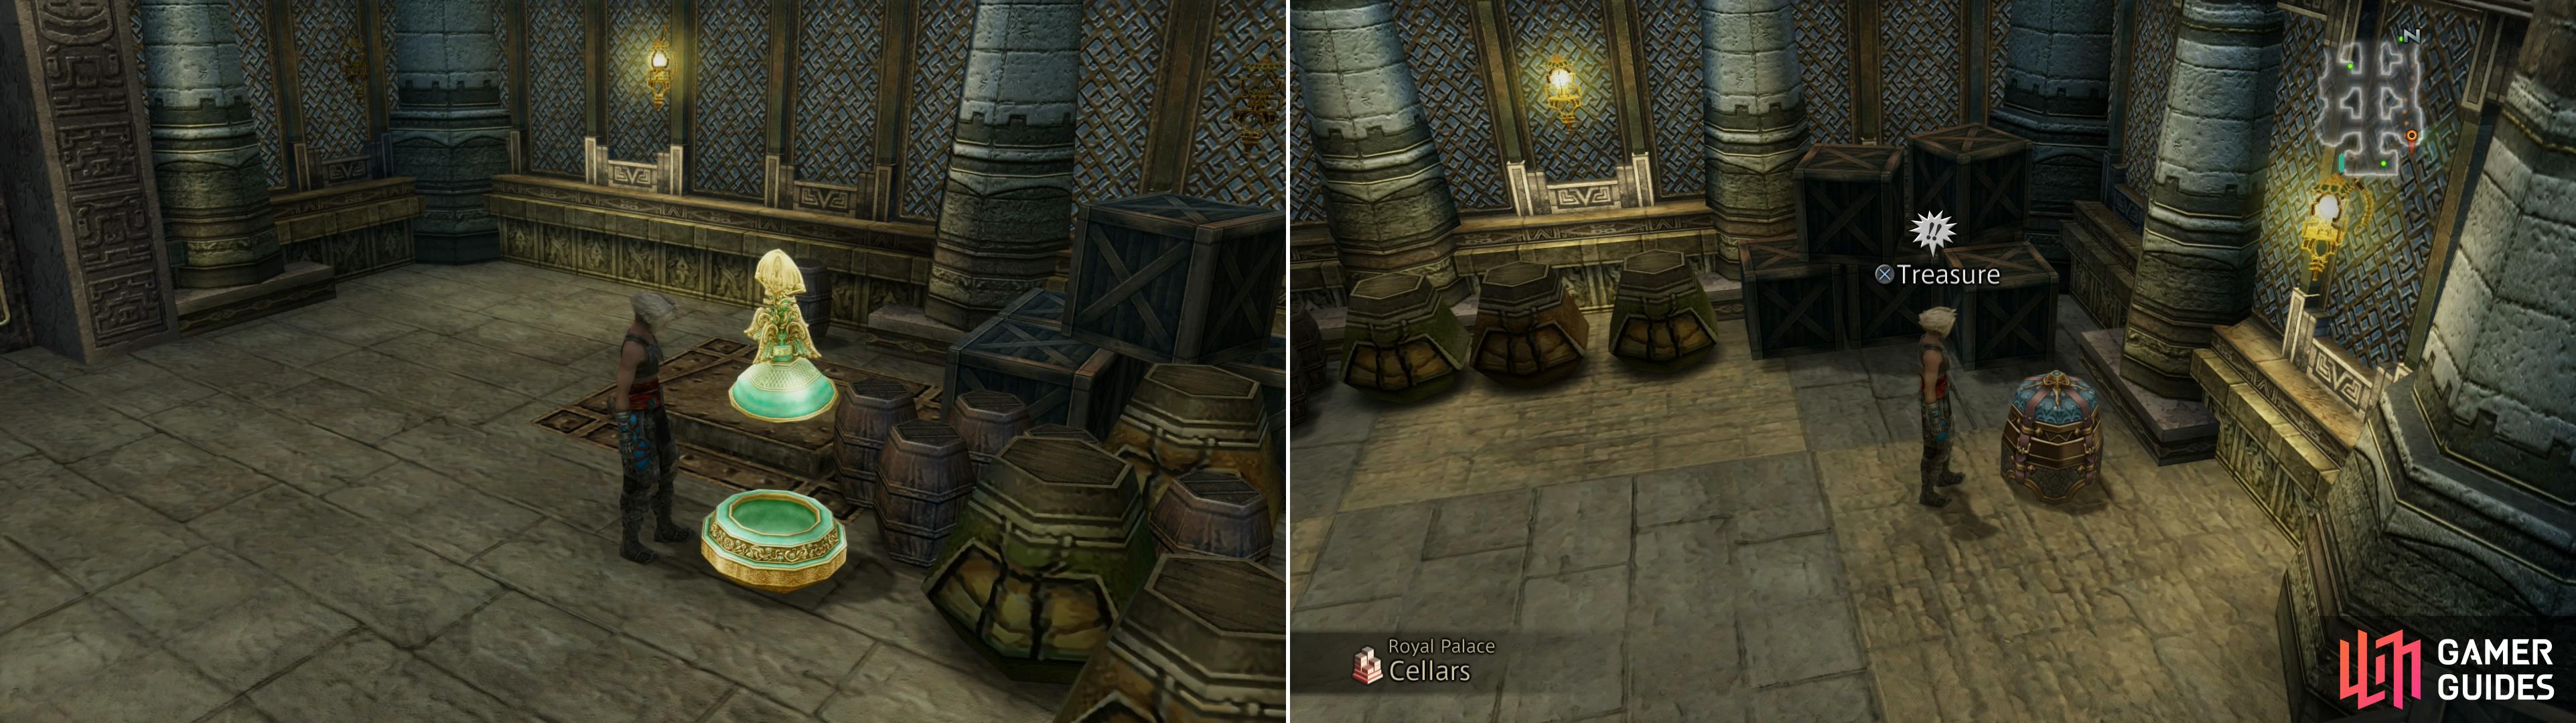 When you surface in the Royal Palace of Rabanastre, grab a map out of a decorative urn (left), but don’t neglect to other treasures in the palce (right)!